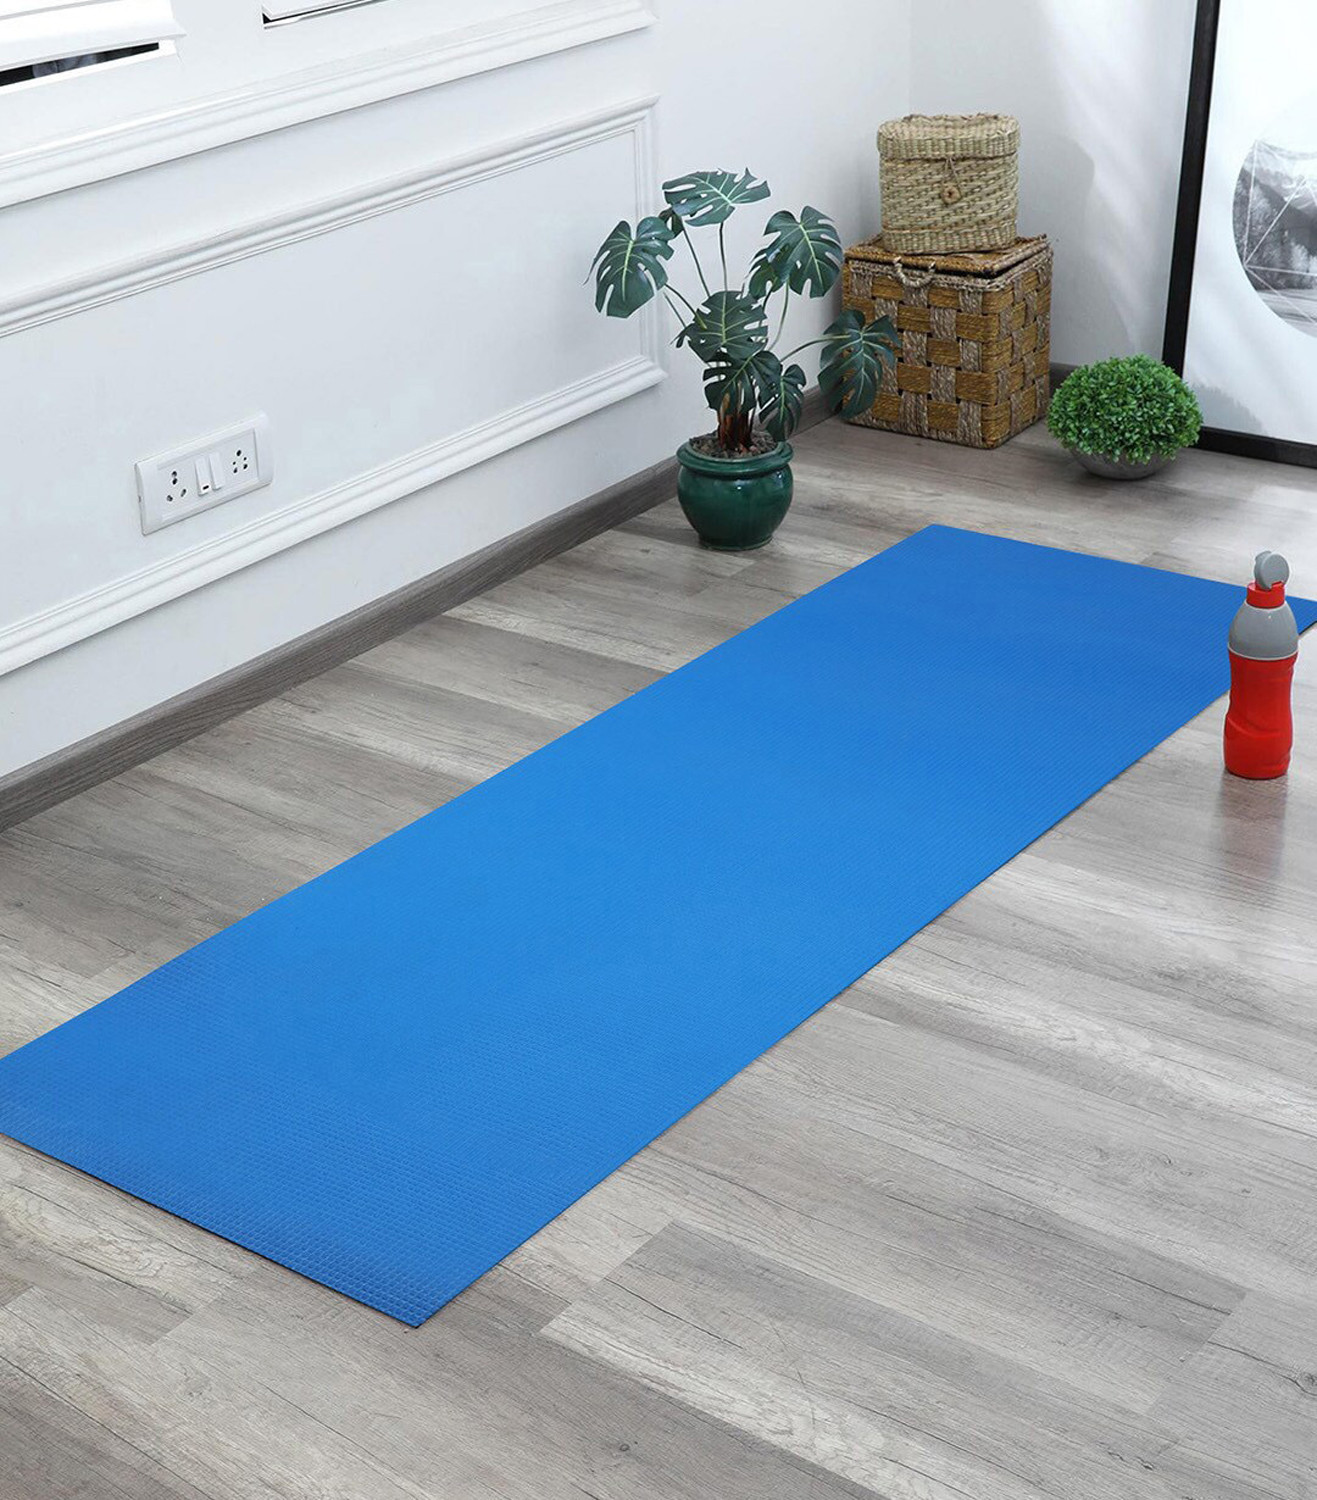 Kuber Industries 4 MM Extra Thick Yoga mat for Gym Workout and Flooring Exercise Long Size Yoga Mat for Men and Women, 6 x 2 Feet (Blue)-33_S_KUBQMART11580